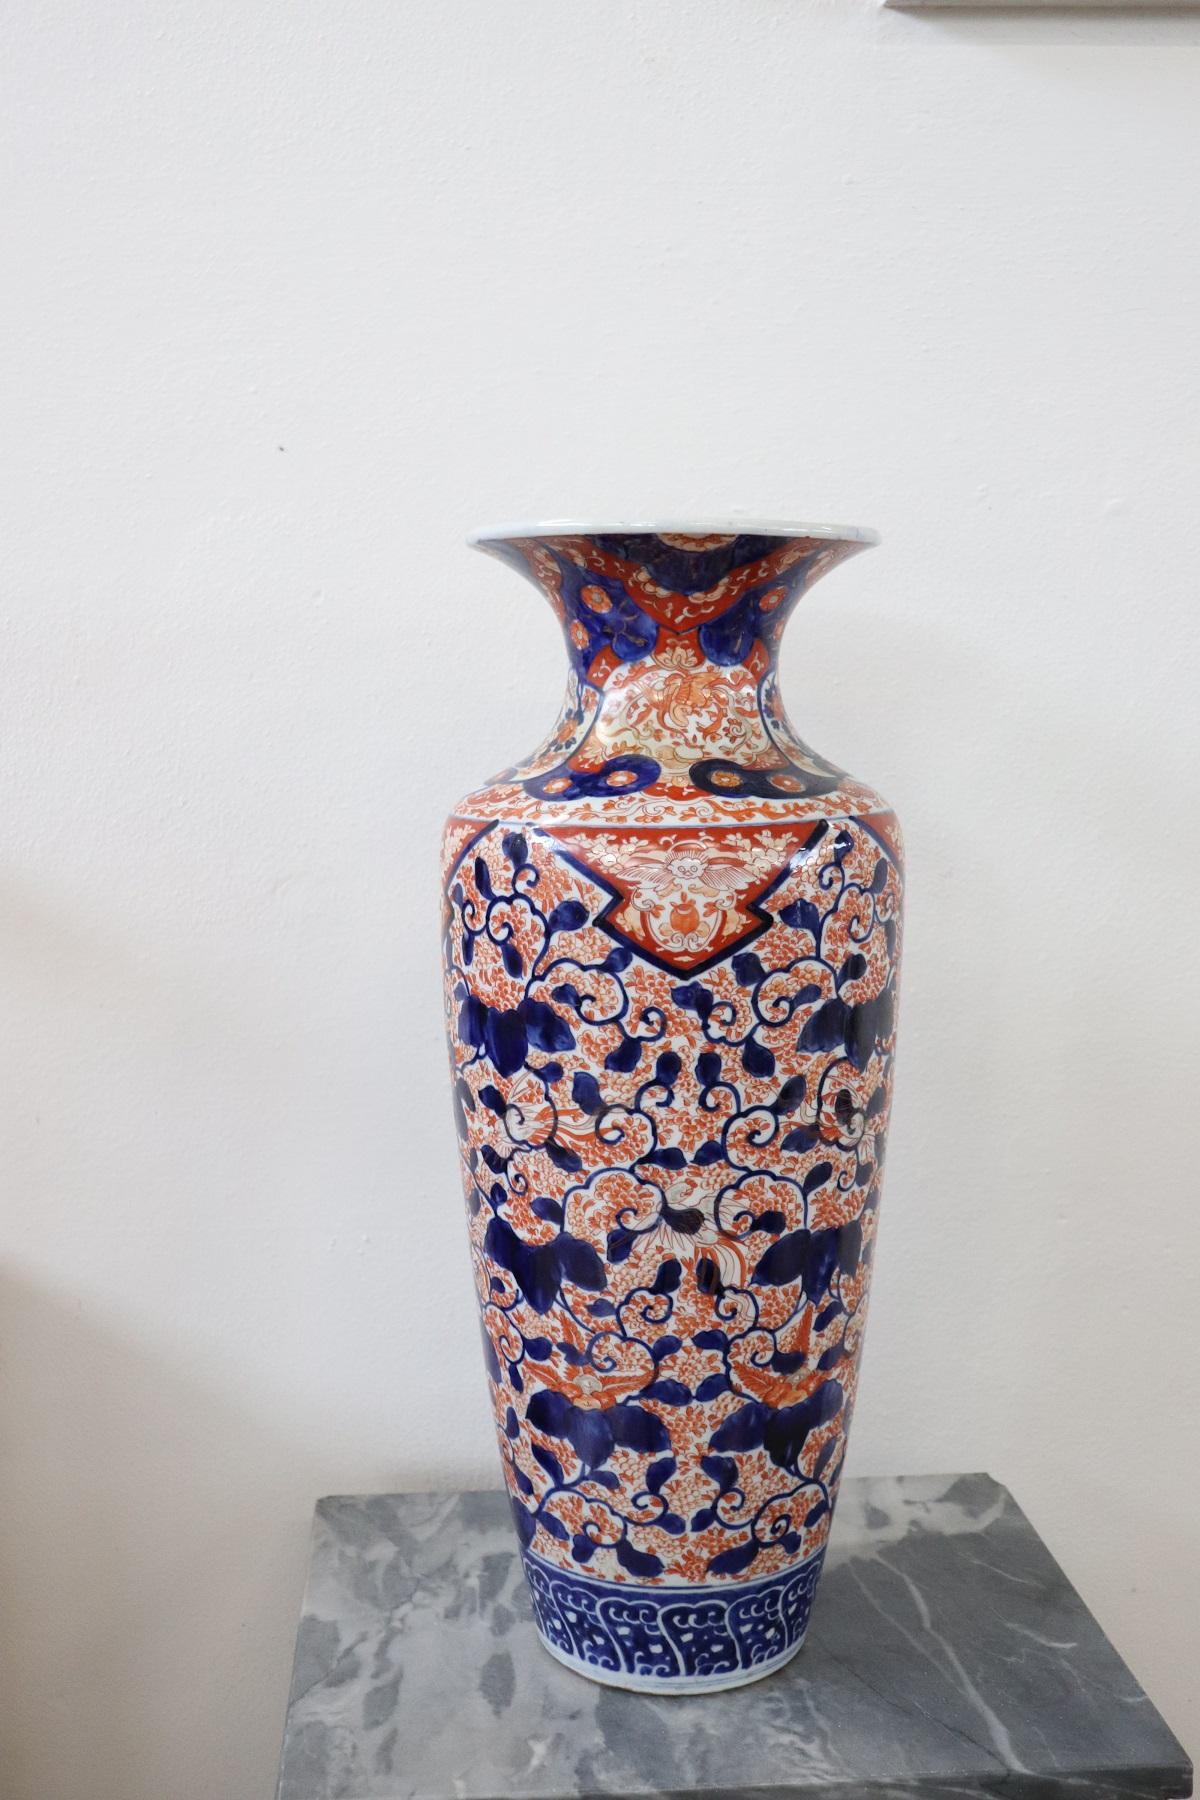 Refined polychrome porcelain large vase Japanese 19th century. Beautiful Imari decoration. Ideal for decorating an Asian style home. Present restoration on the neck.